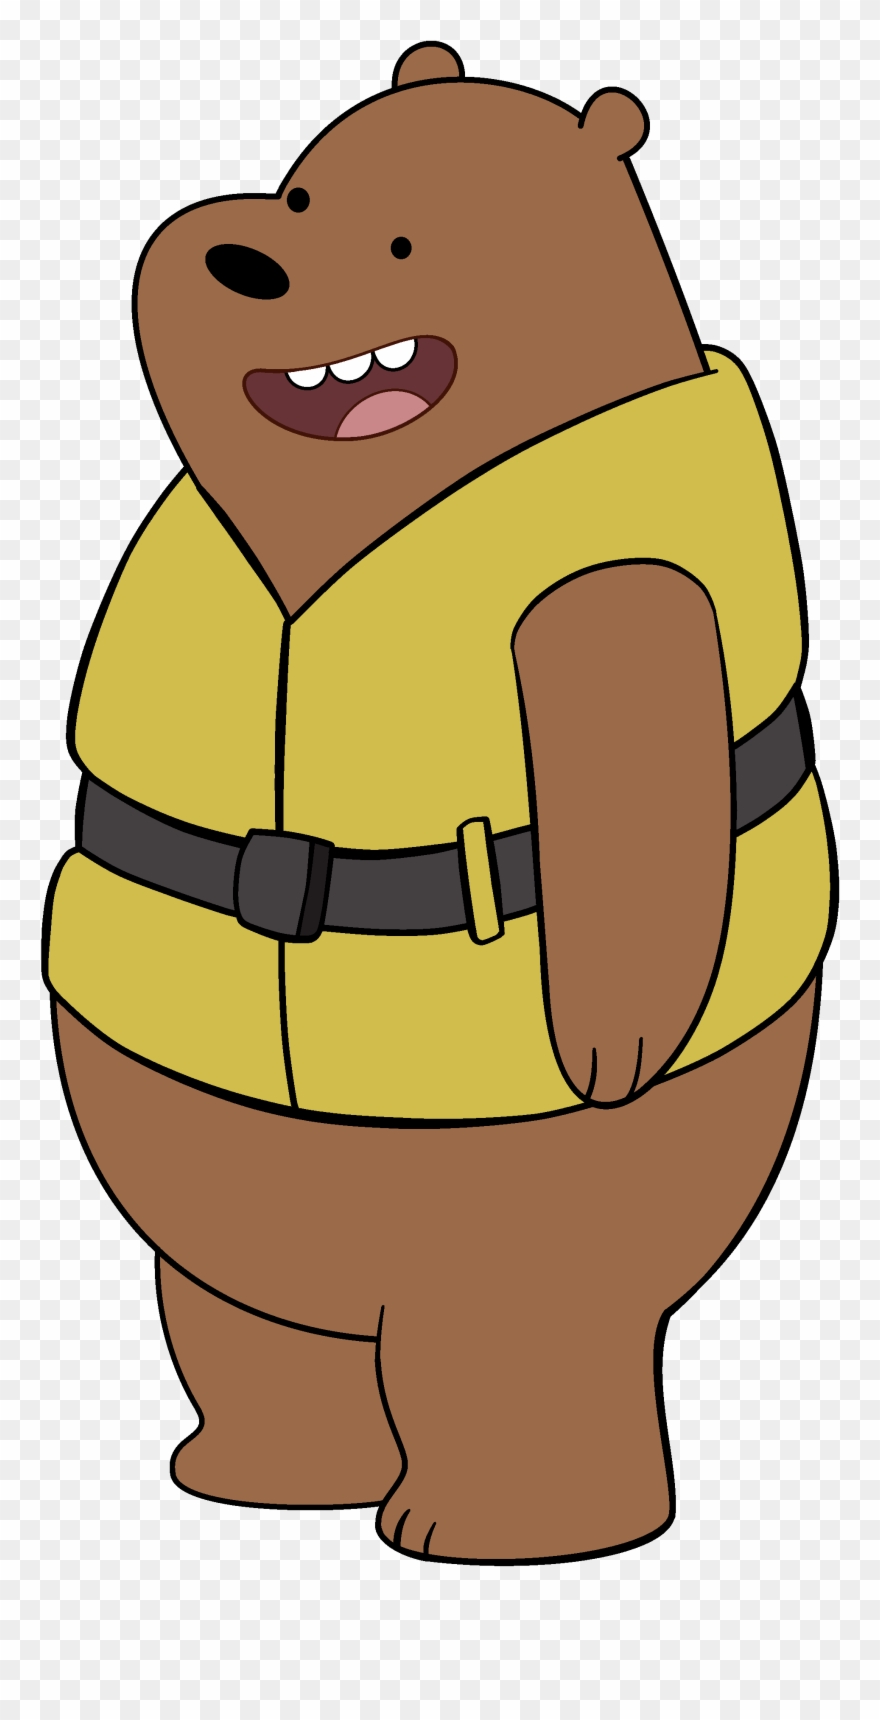 Bears clipart baer. Image life png we